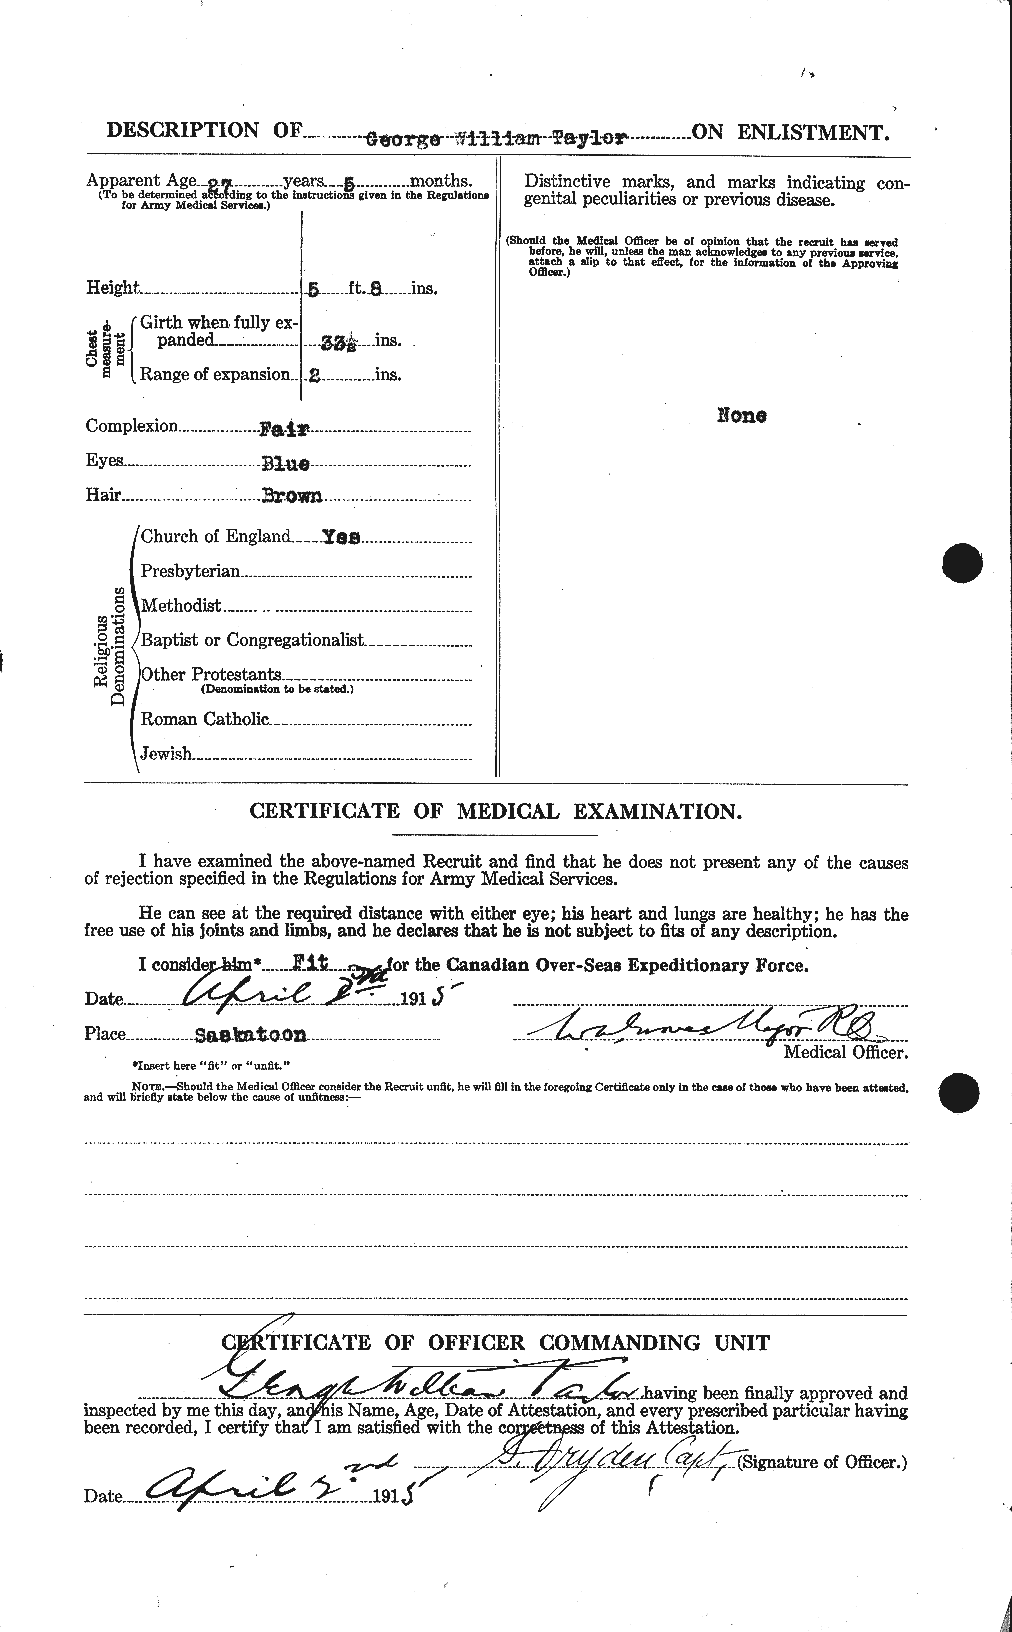 Personnel Records of the First World War - CEF 626367b